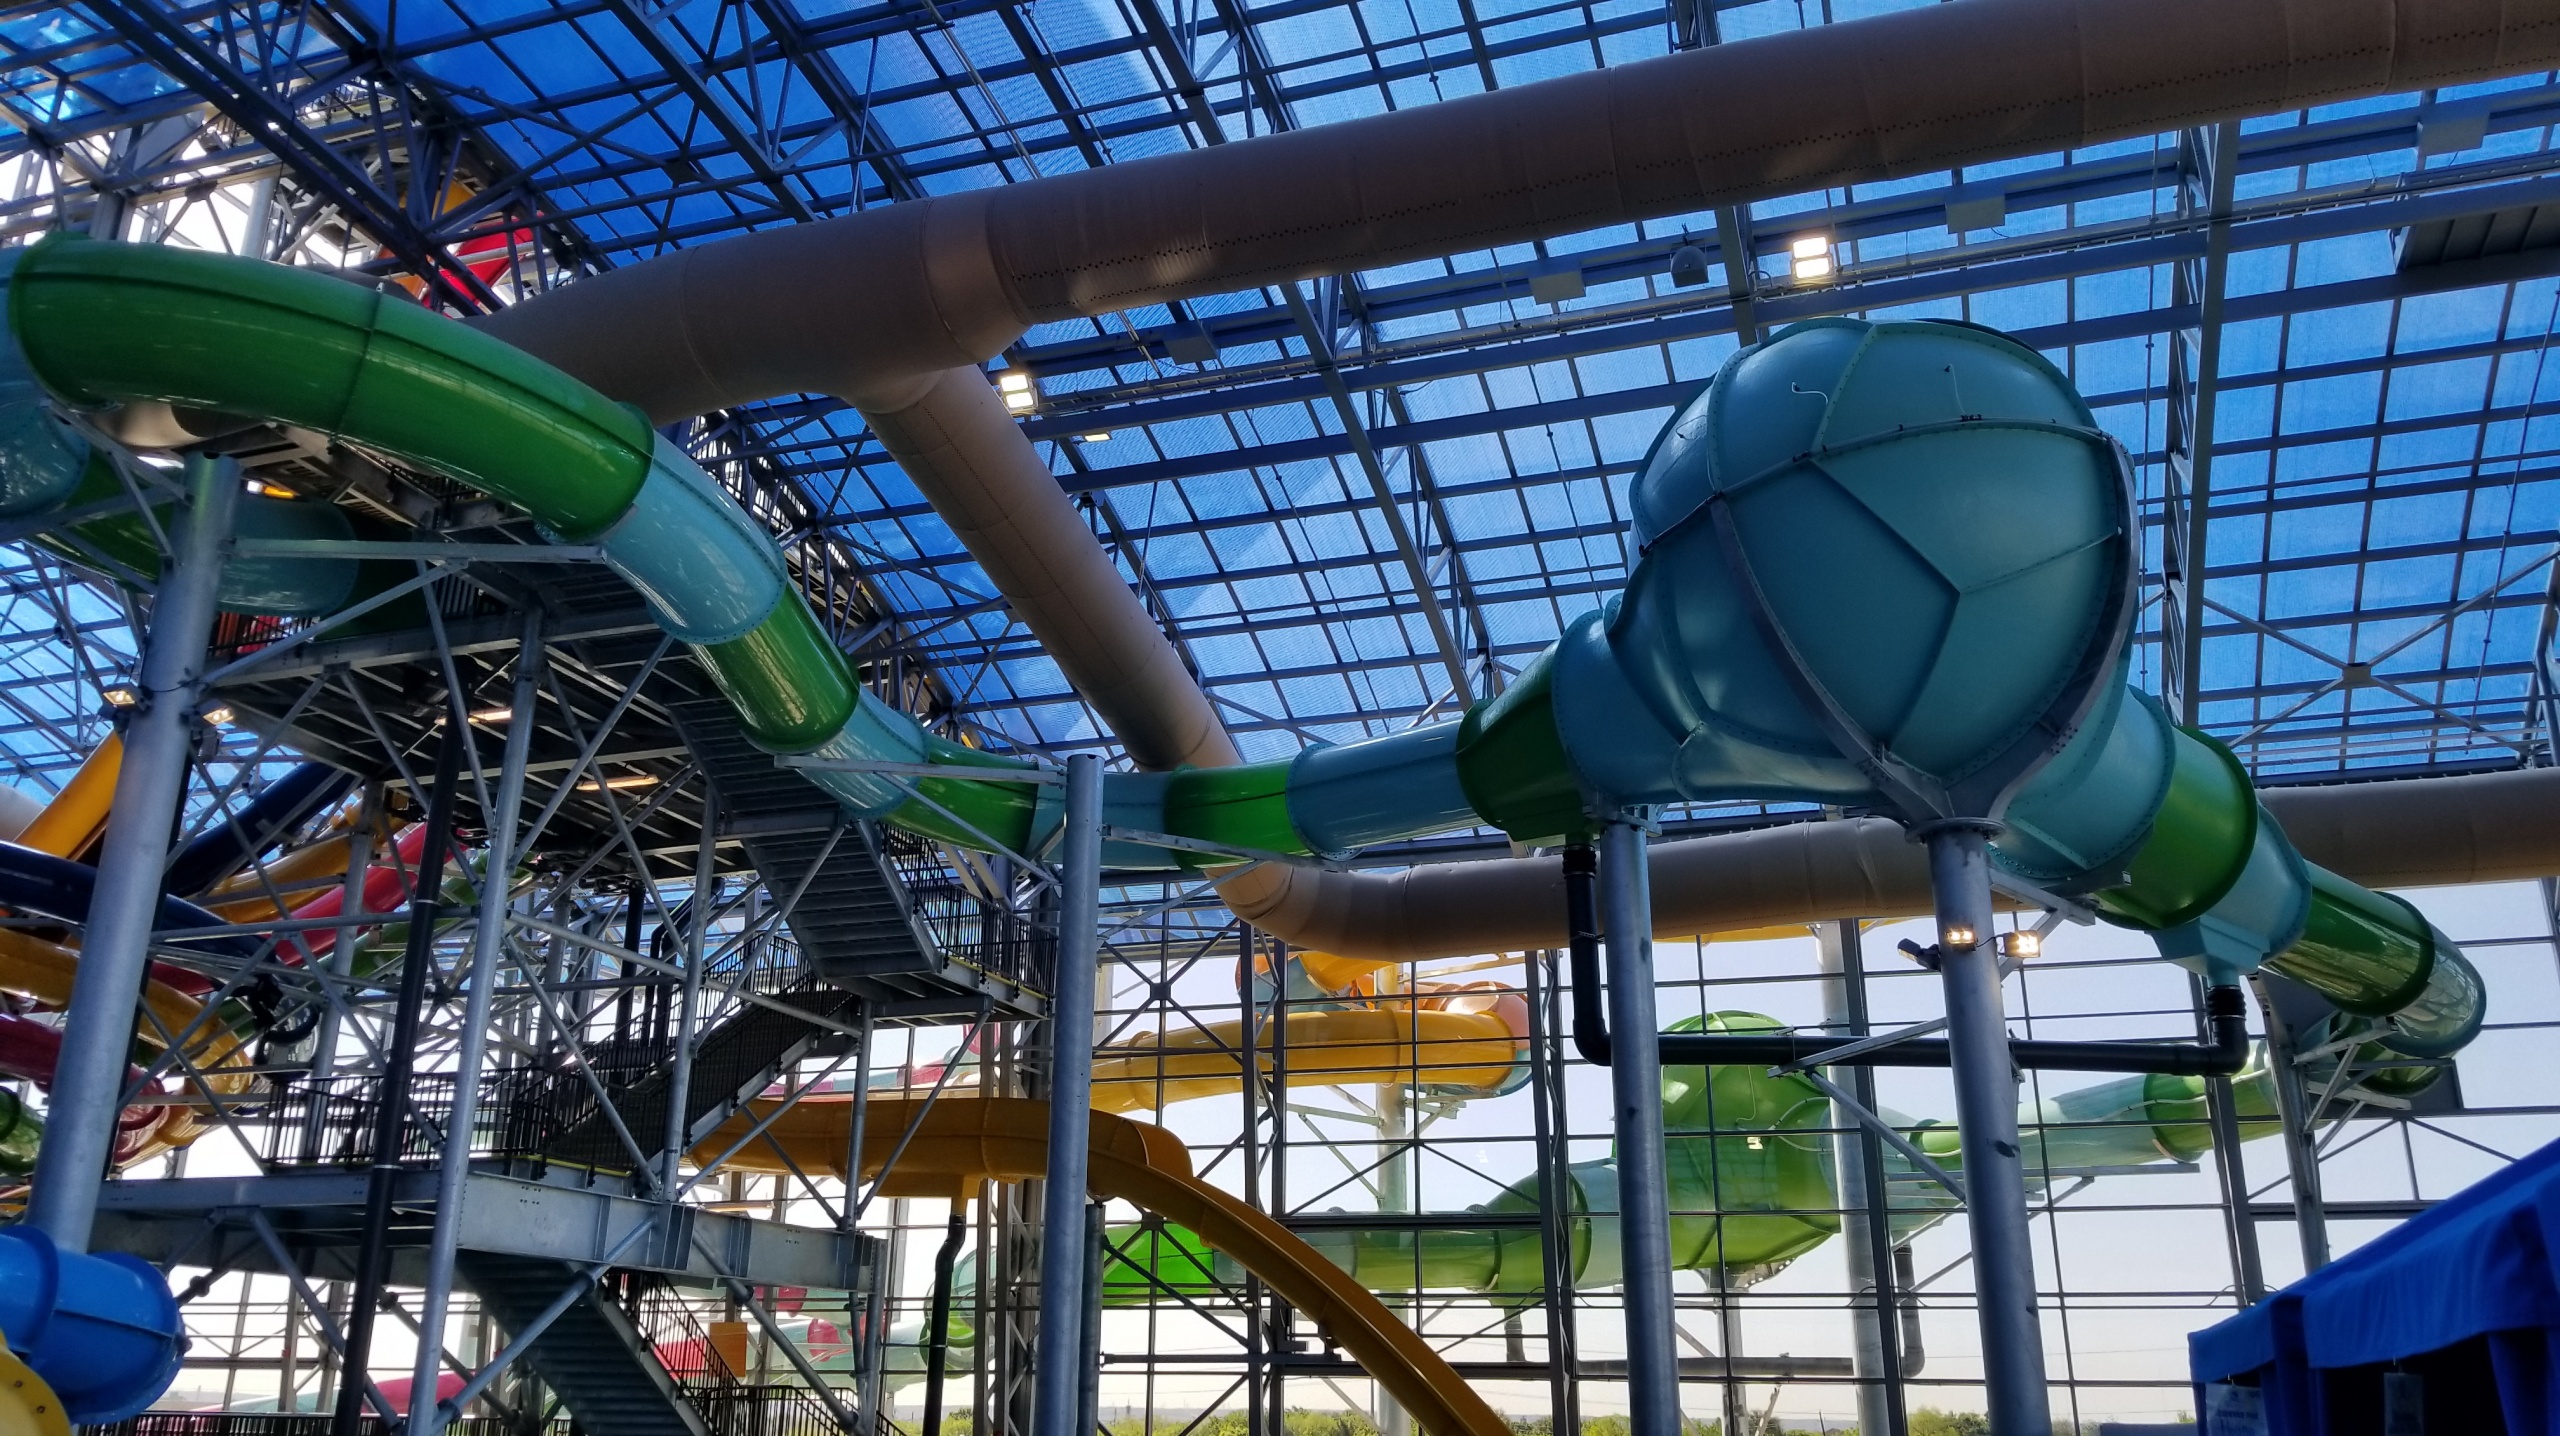 epic water park